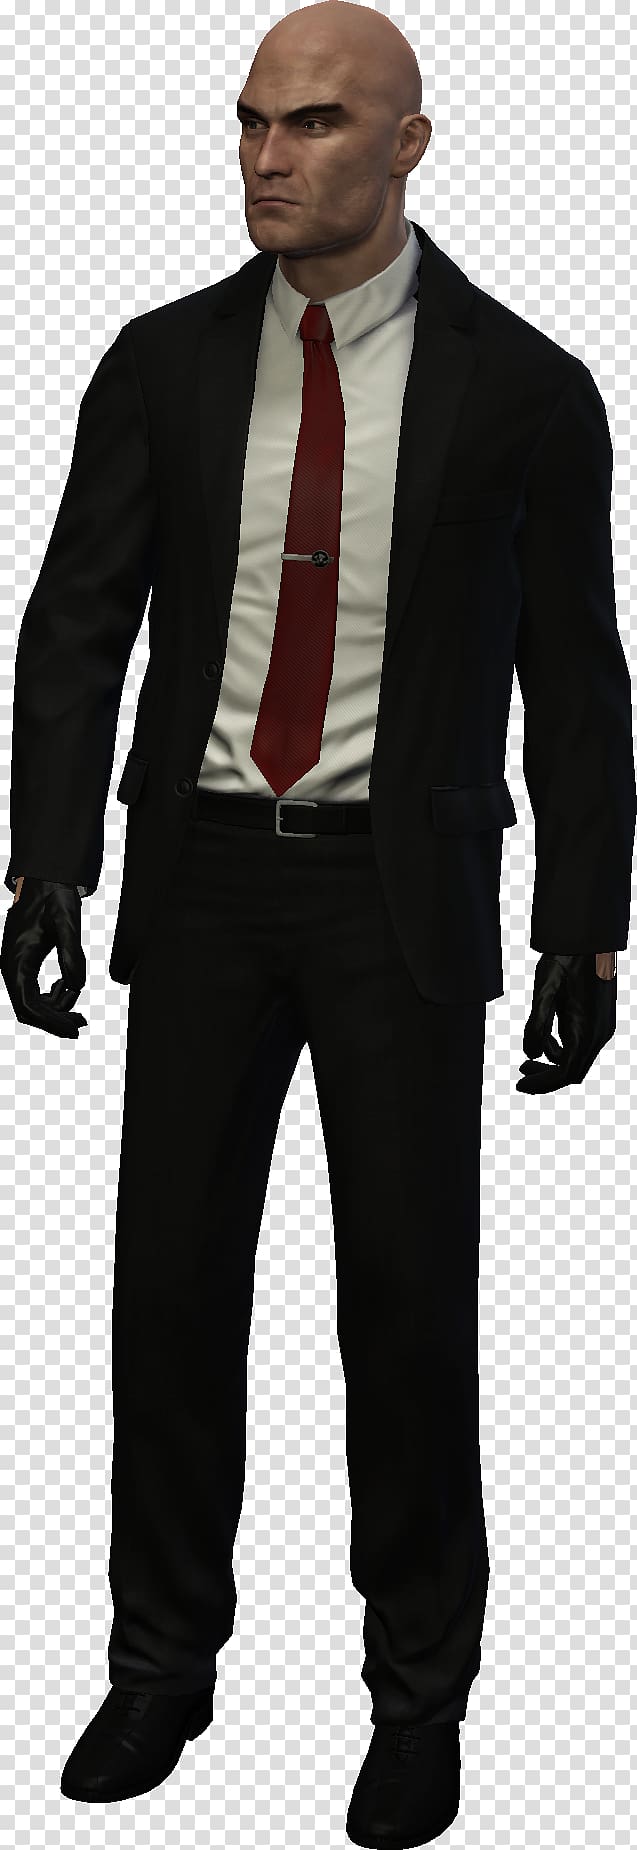 Hitman: Absolution Timothy Olyphant Agent 47, Hitman transparent background PNG clipart